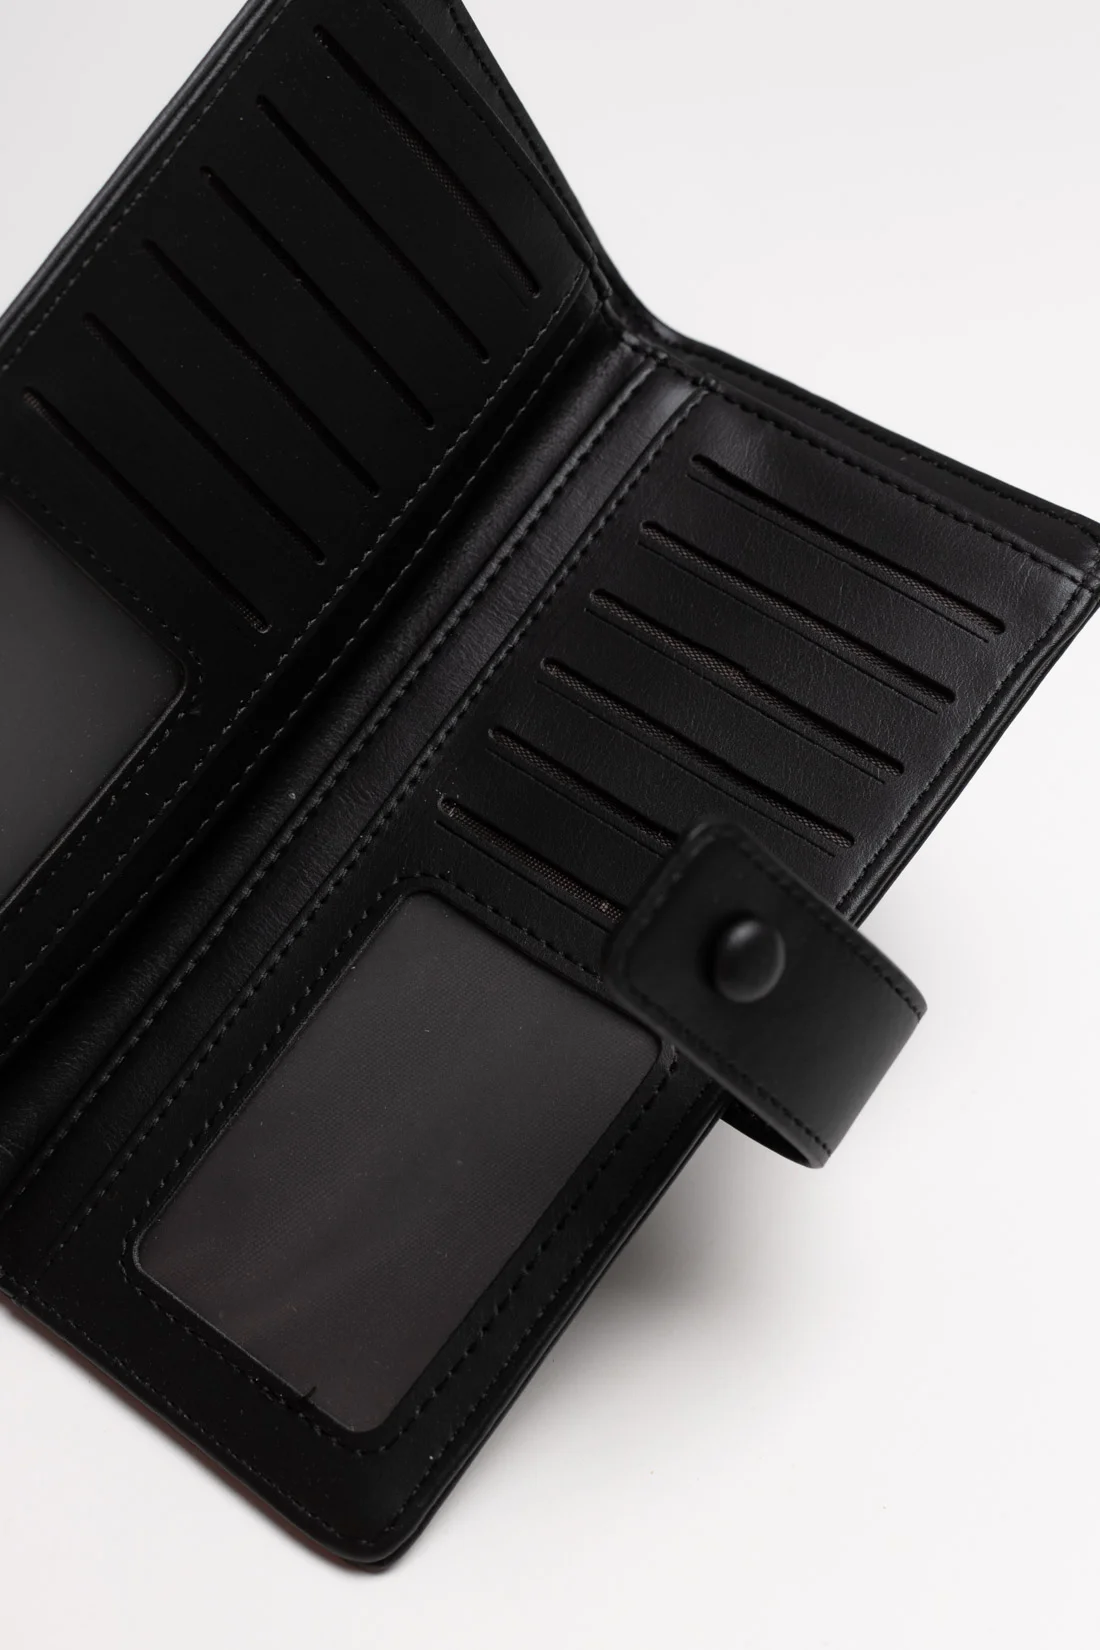 NICORA WALLET AND CARD HOLDER PACK - BLACK